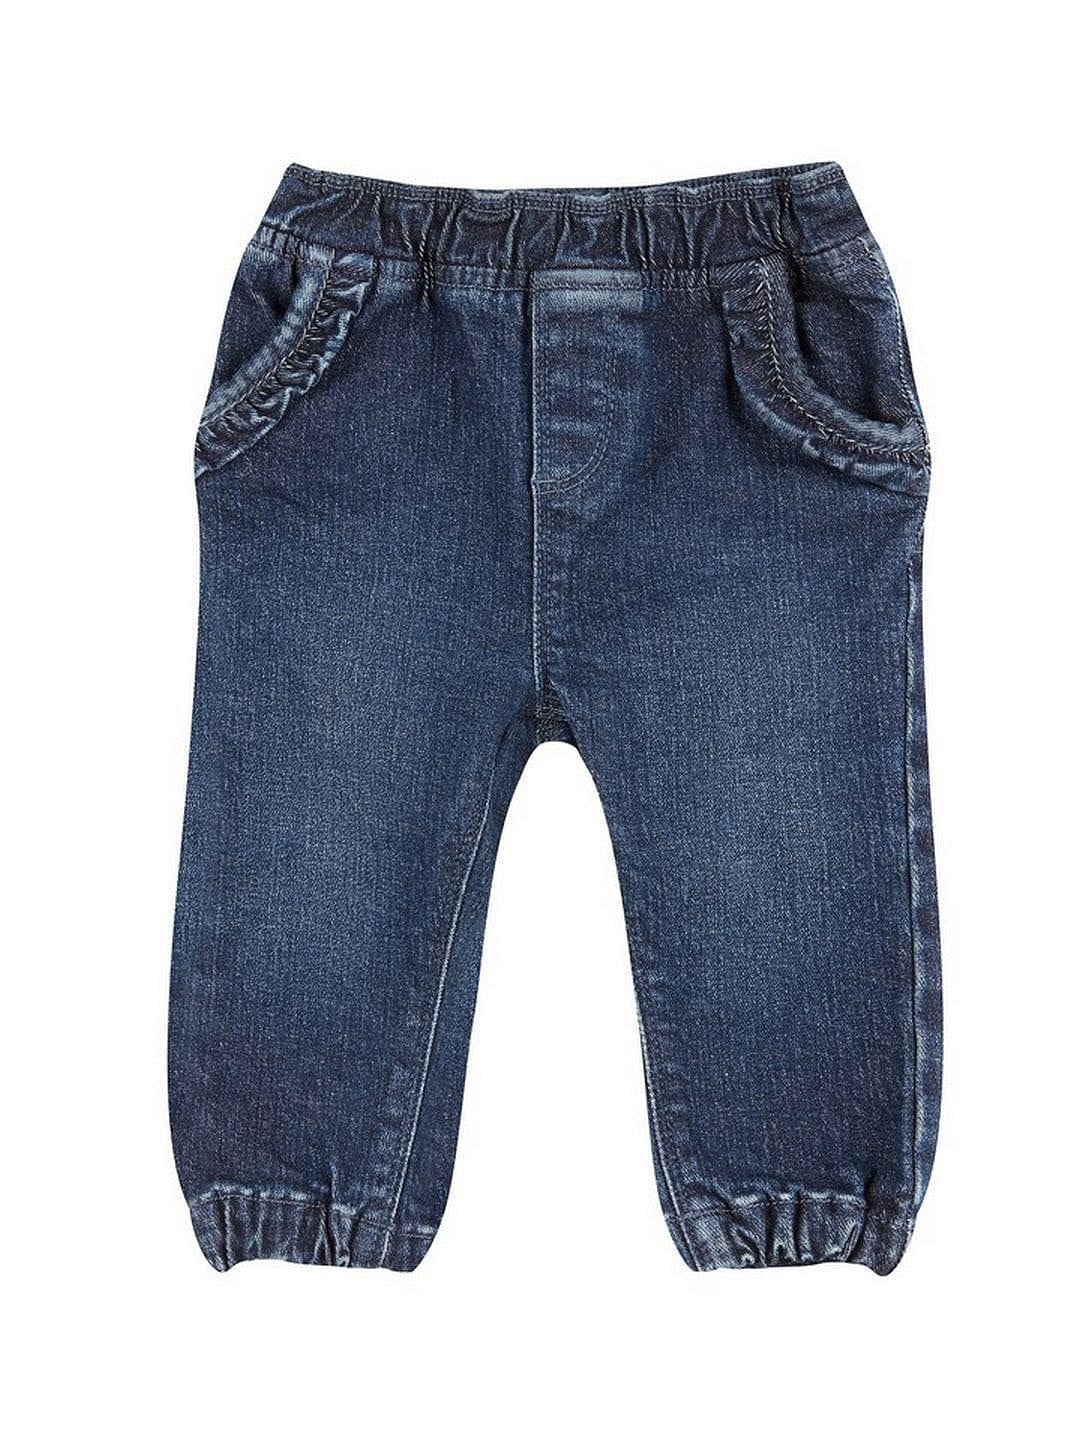 Mothercare | Midwash Ruffle Jeans 0